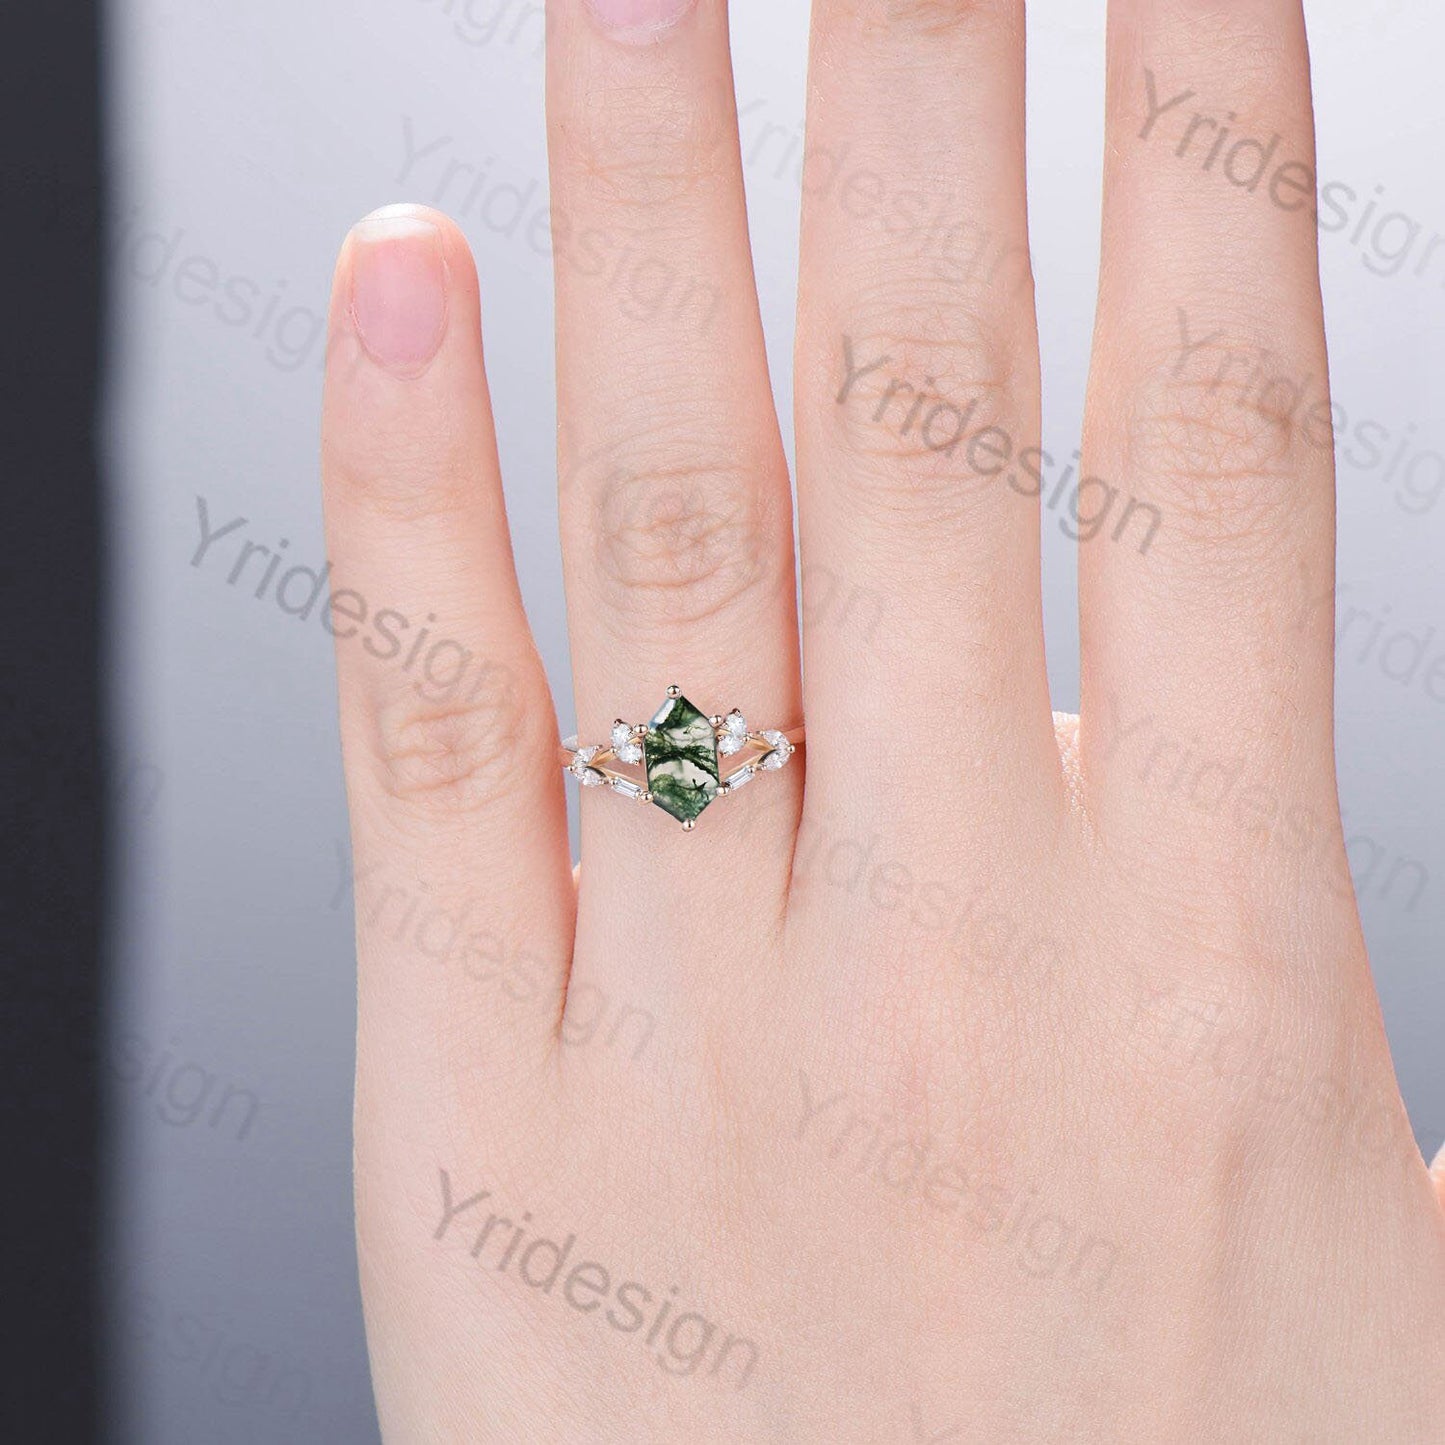 Unique Long hexagon cut moss agate ring Vintage Green Agate engagement ring delicate moissanite wedding ring art deco proposal gifts women - PENFINE